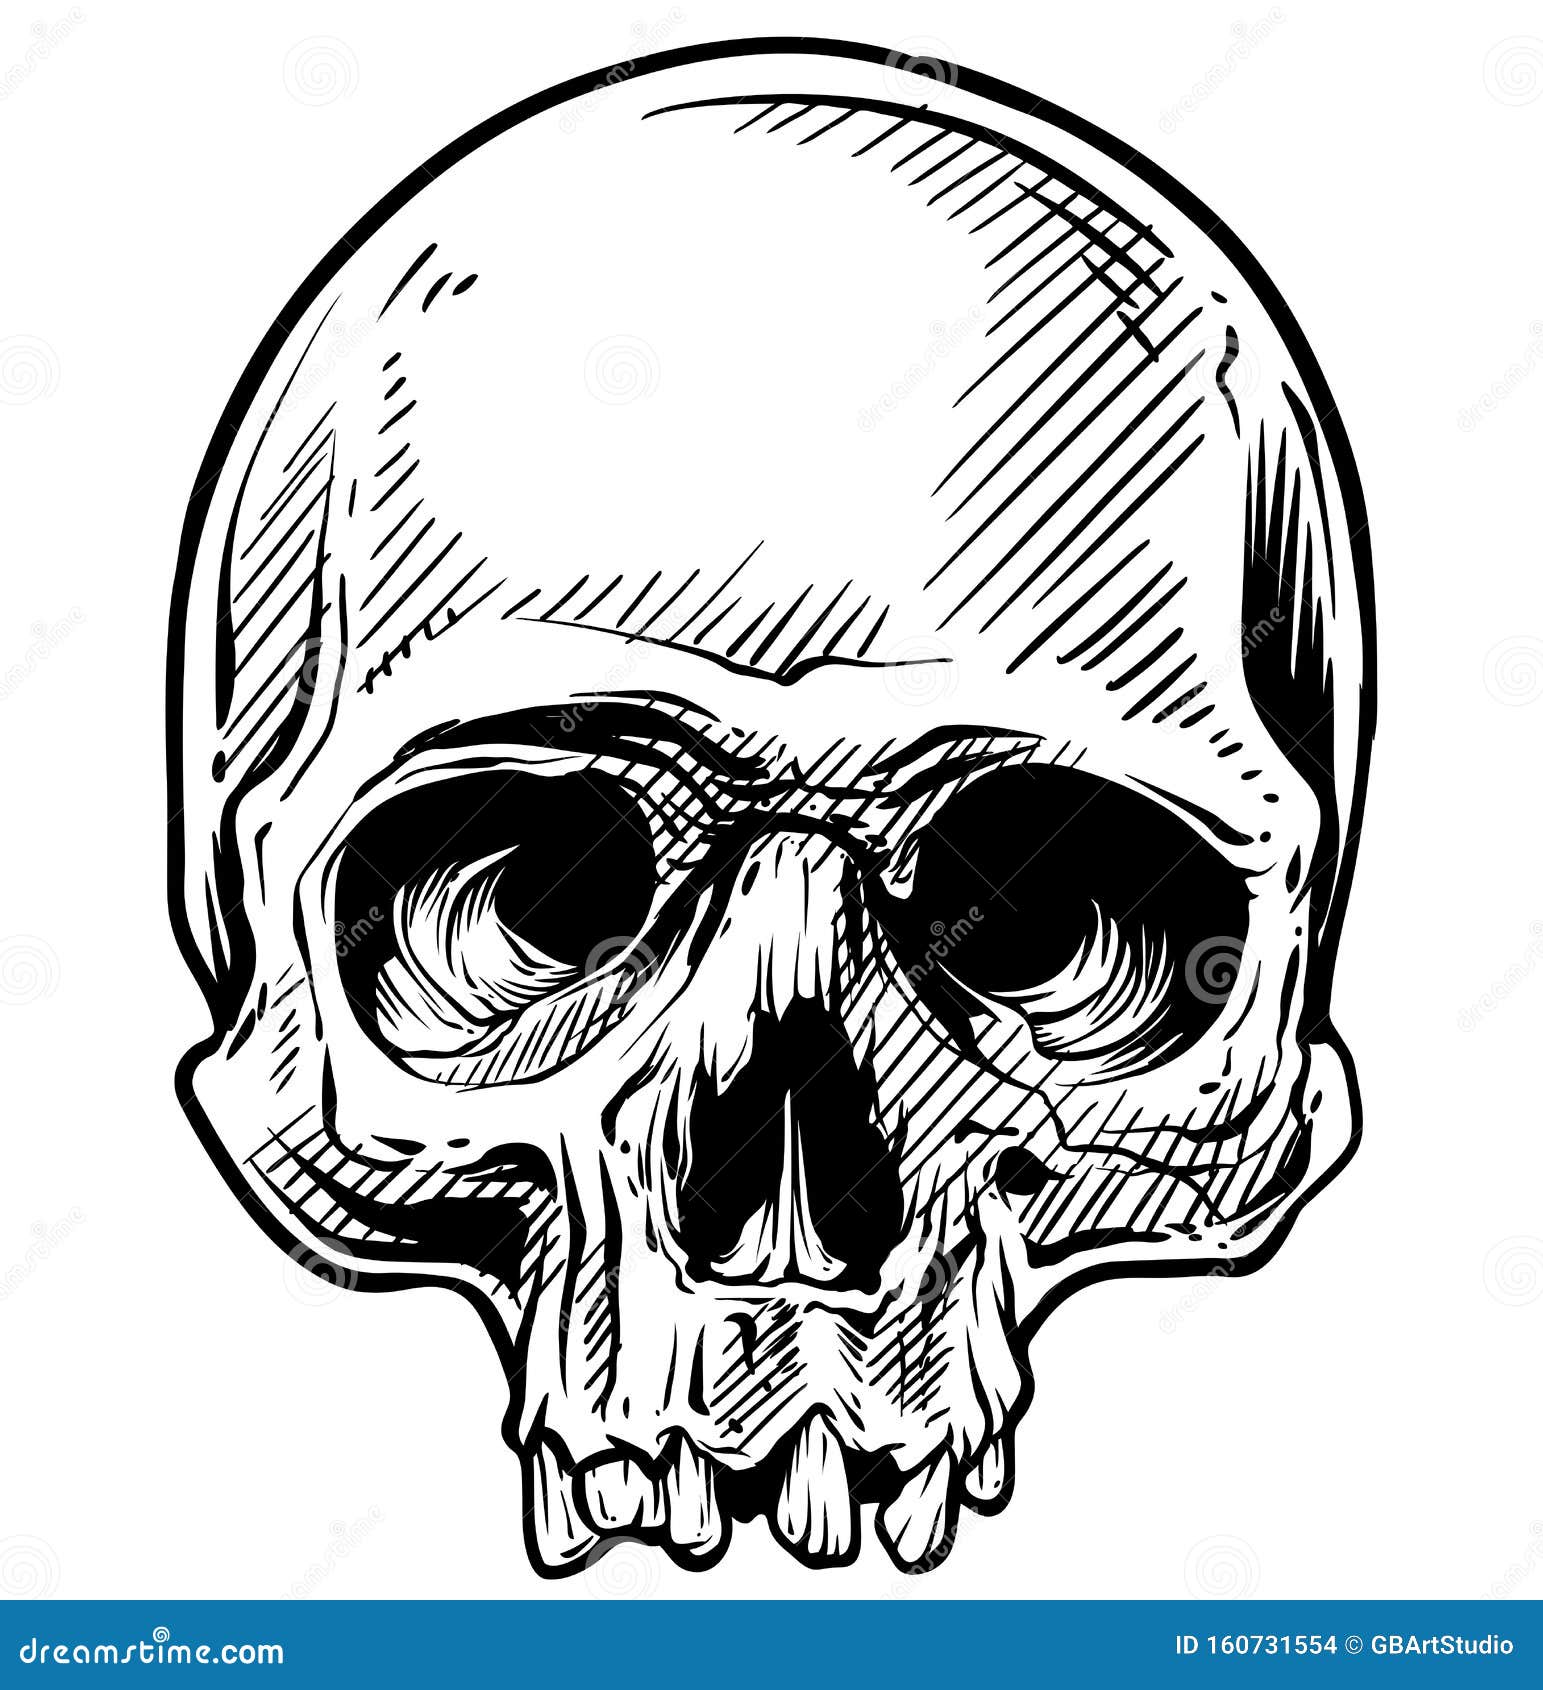 How To Draw A Skull Step By Step  Skull Drawing Easy  YouTube